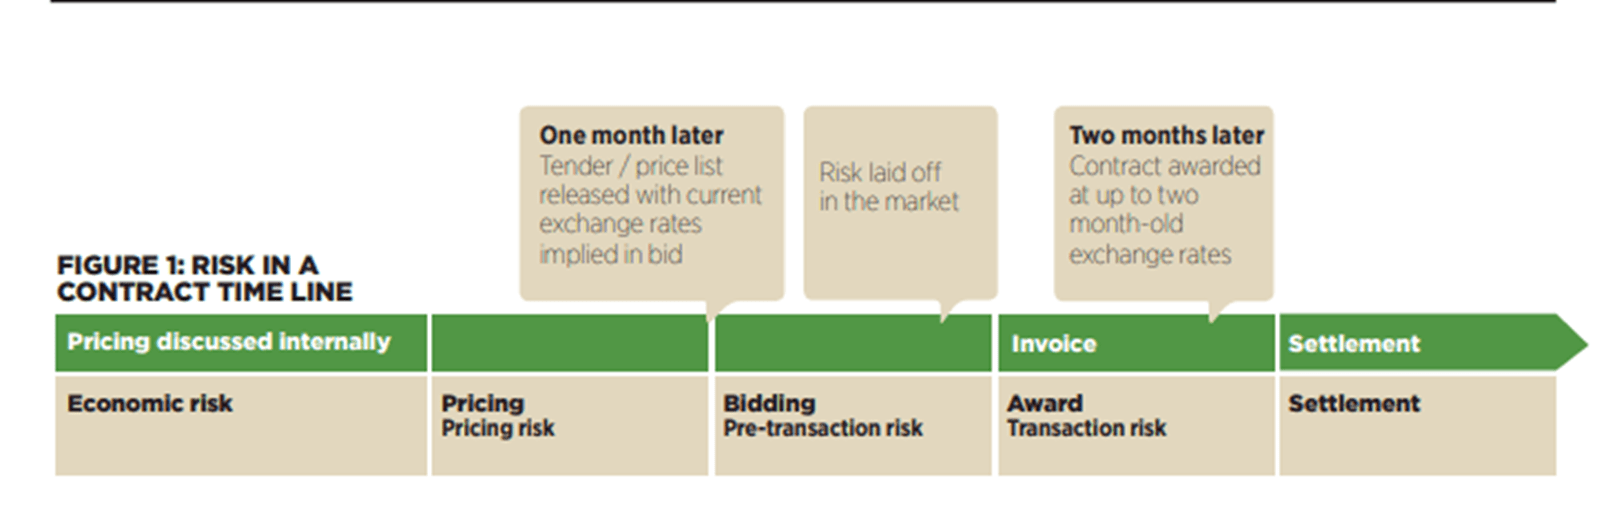 Figure 1: Risk in a contract time line